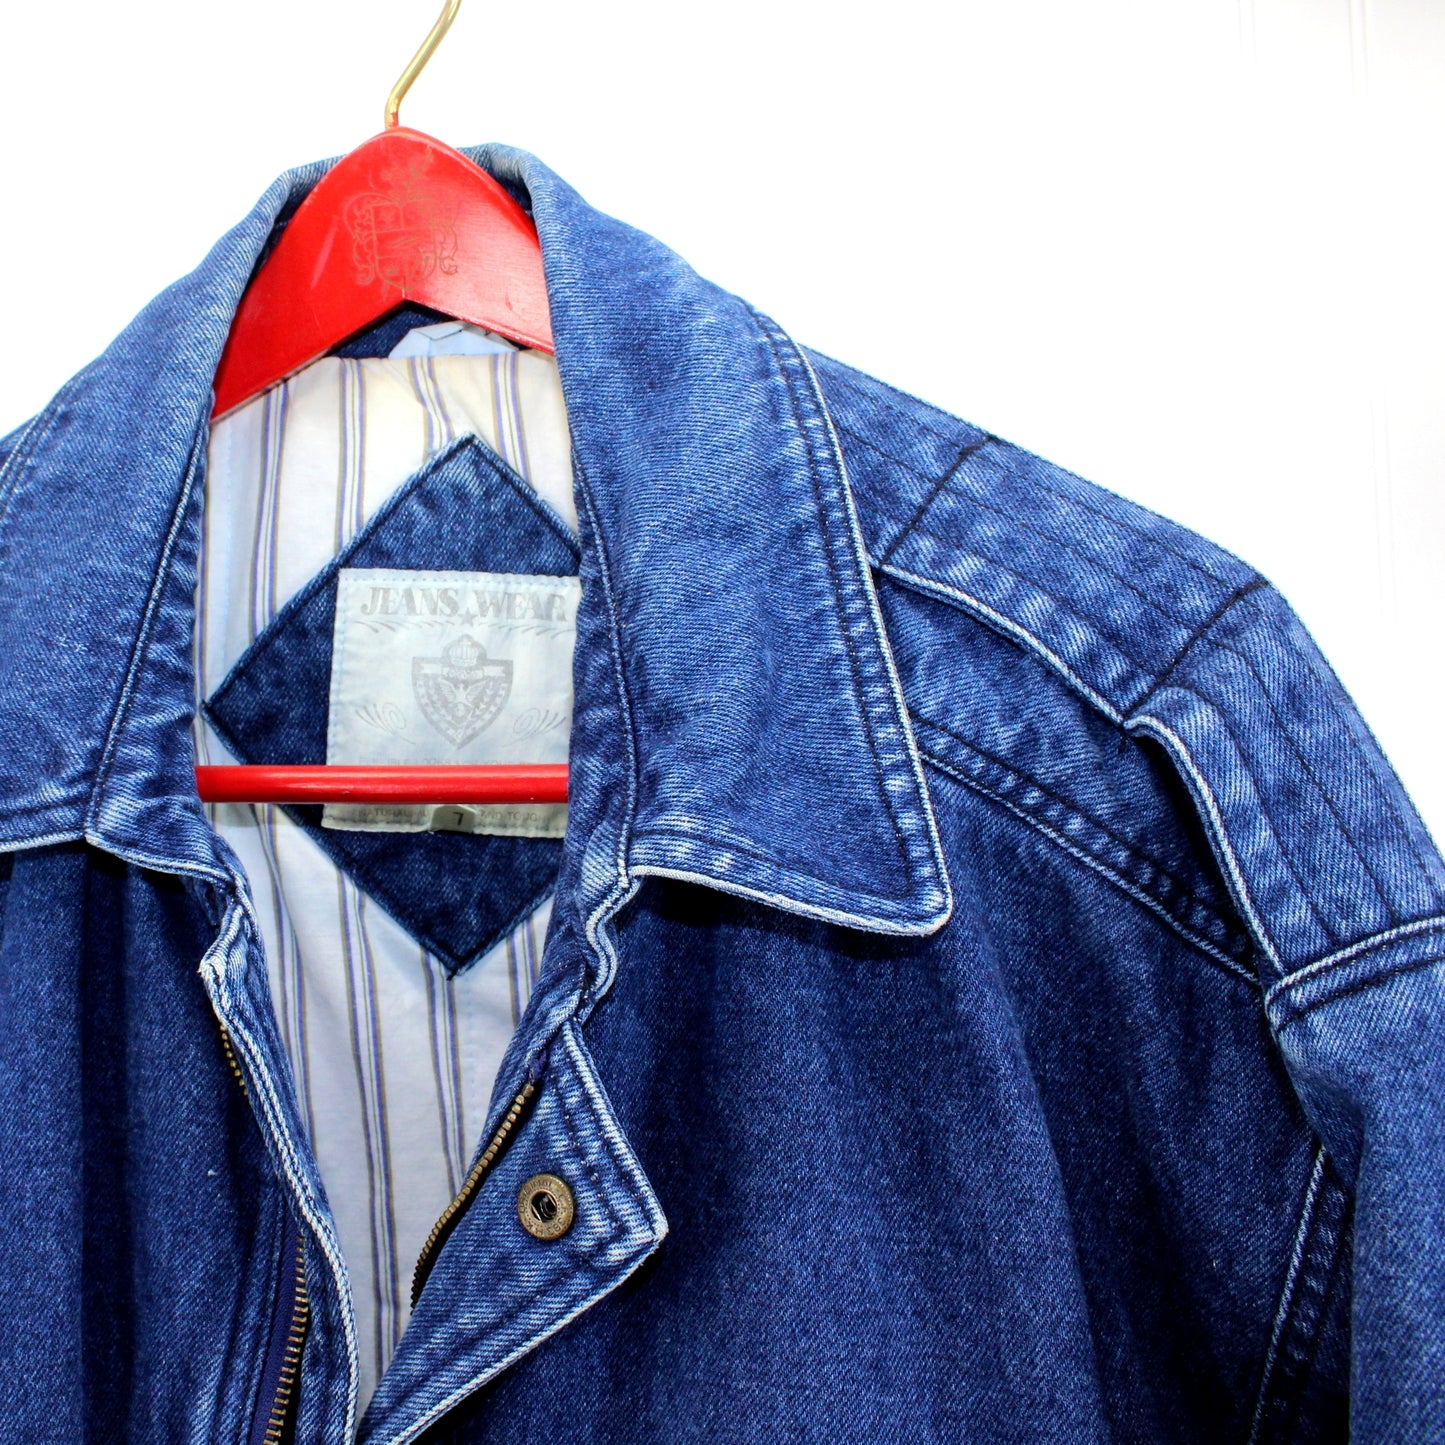 Jeans Wear Trent Blue Denim Cotton Jacket Lined Blue White Stripe Great Cut Size L maker and care tags